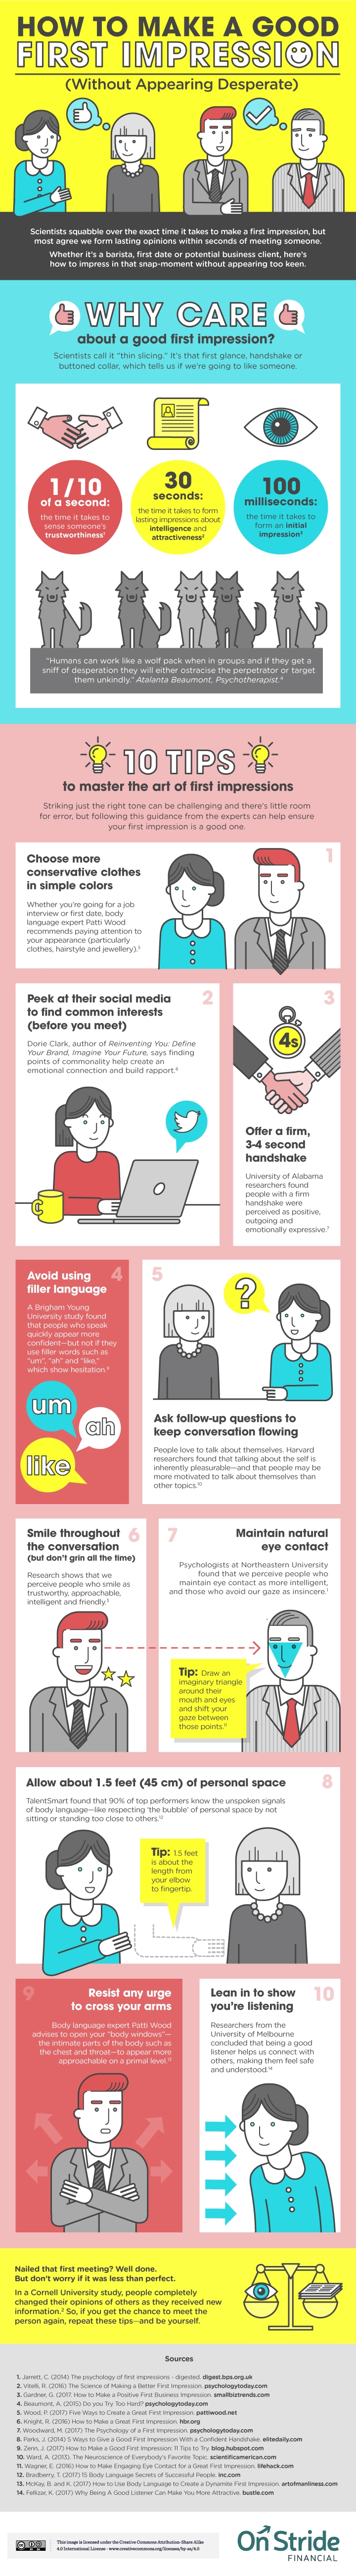 [Infographic] How to Make a Good First Impression (Without Appearing Desperate)